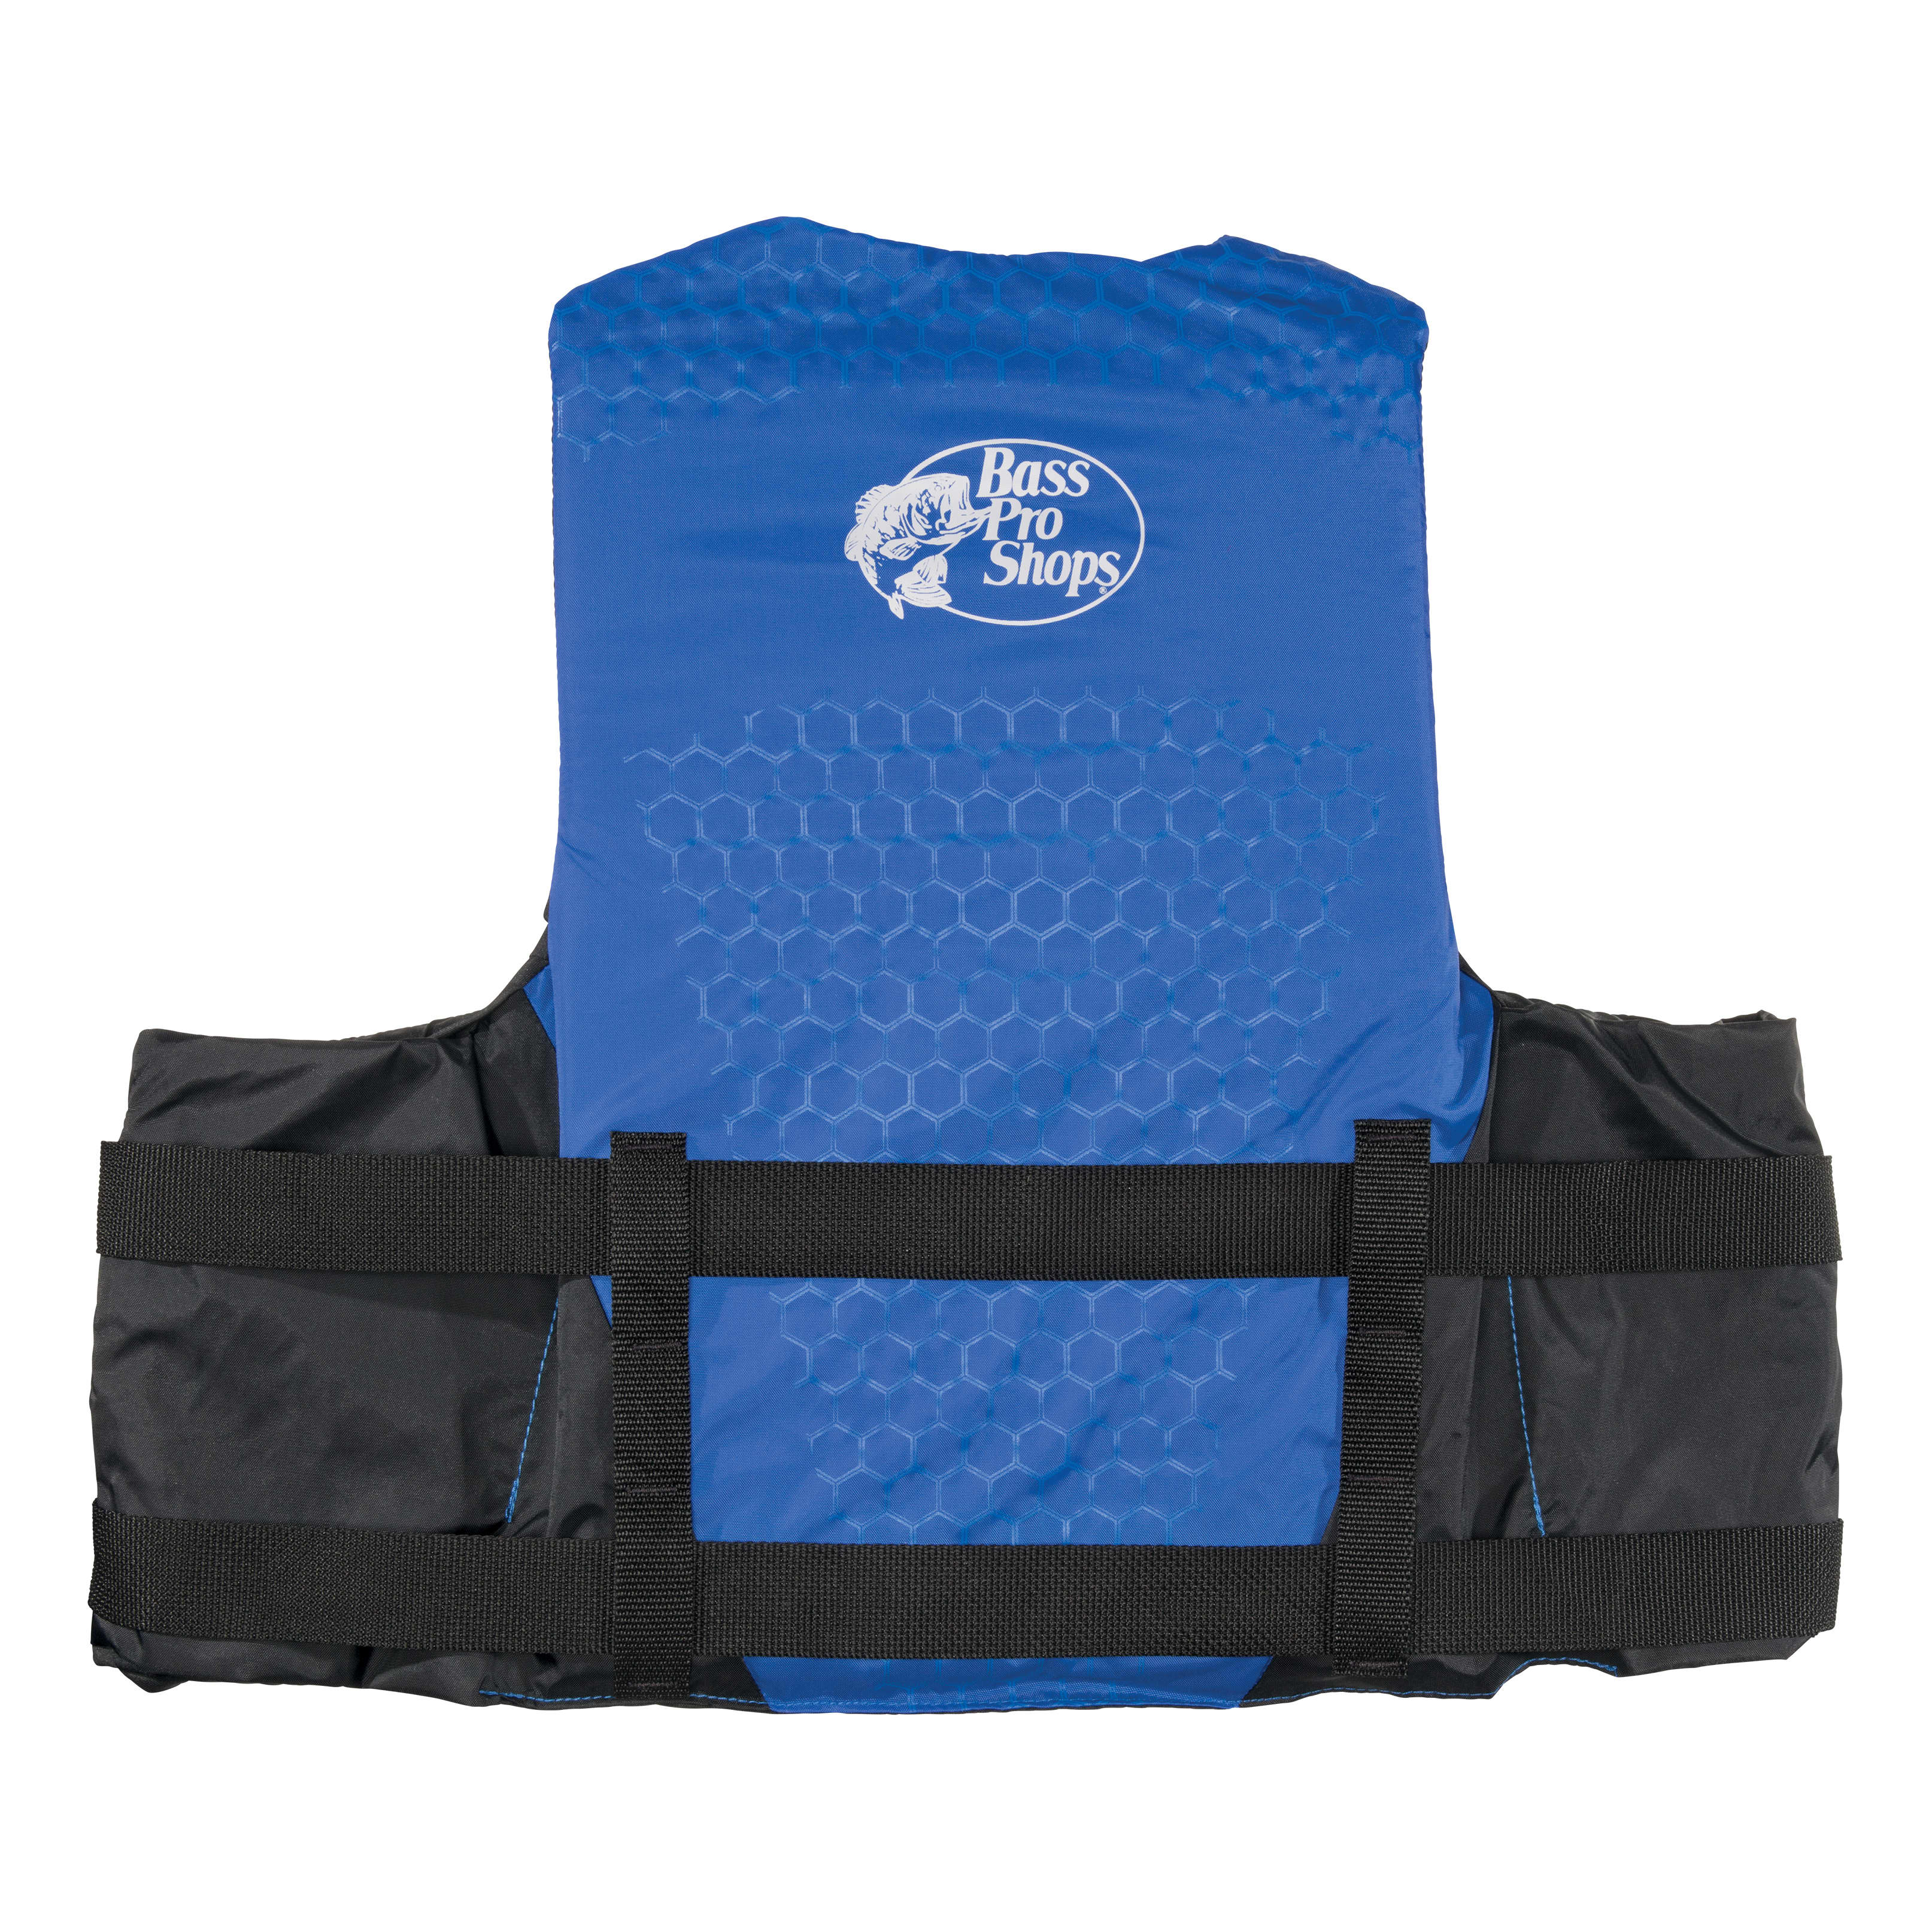 Bass Pro Shops® Traditional Water Ski/Recreational Life Jacket for Adults - Blue - Back View